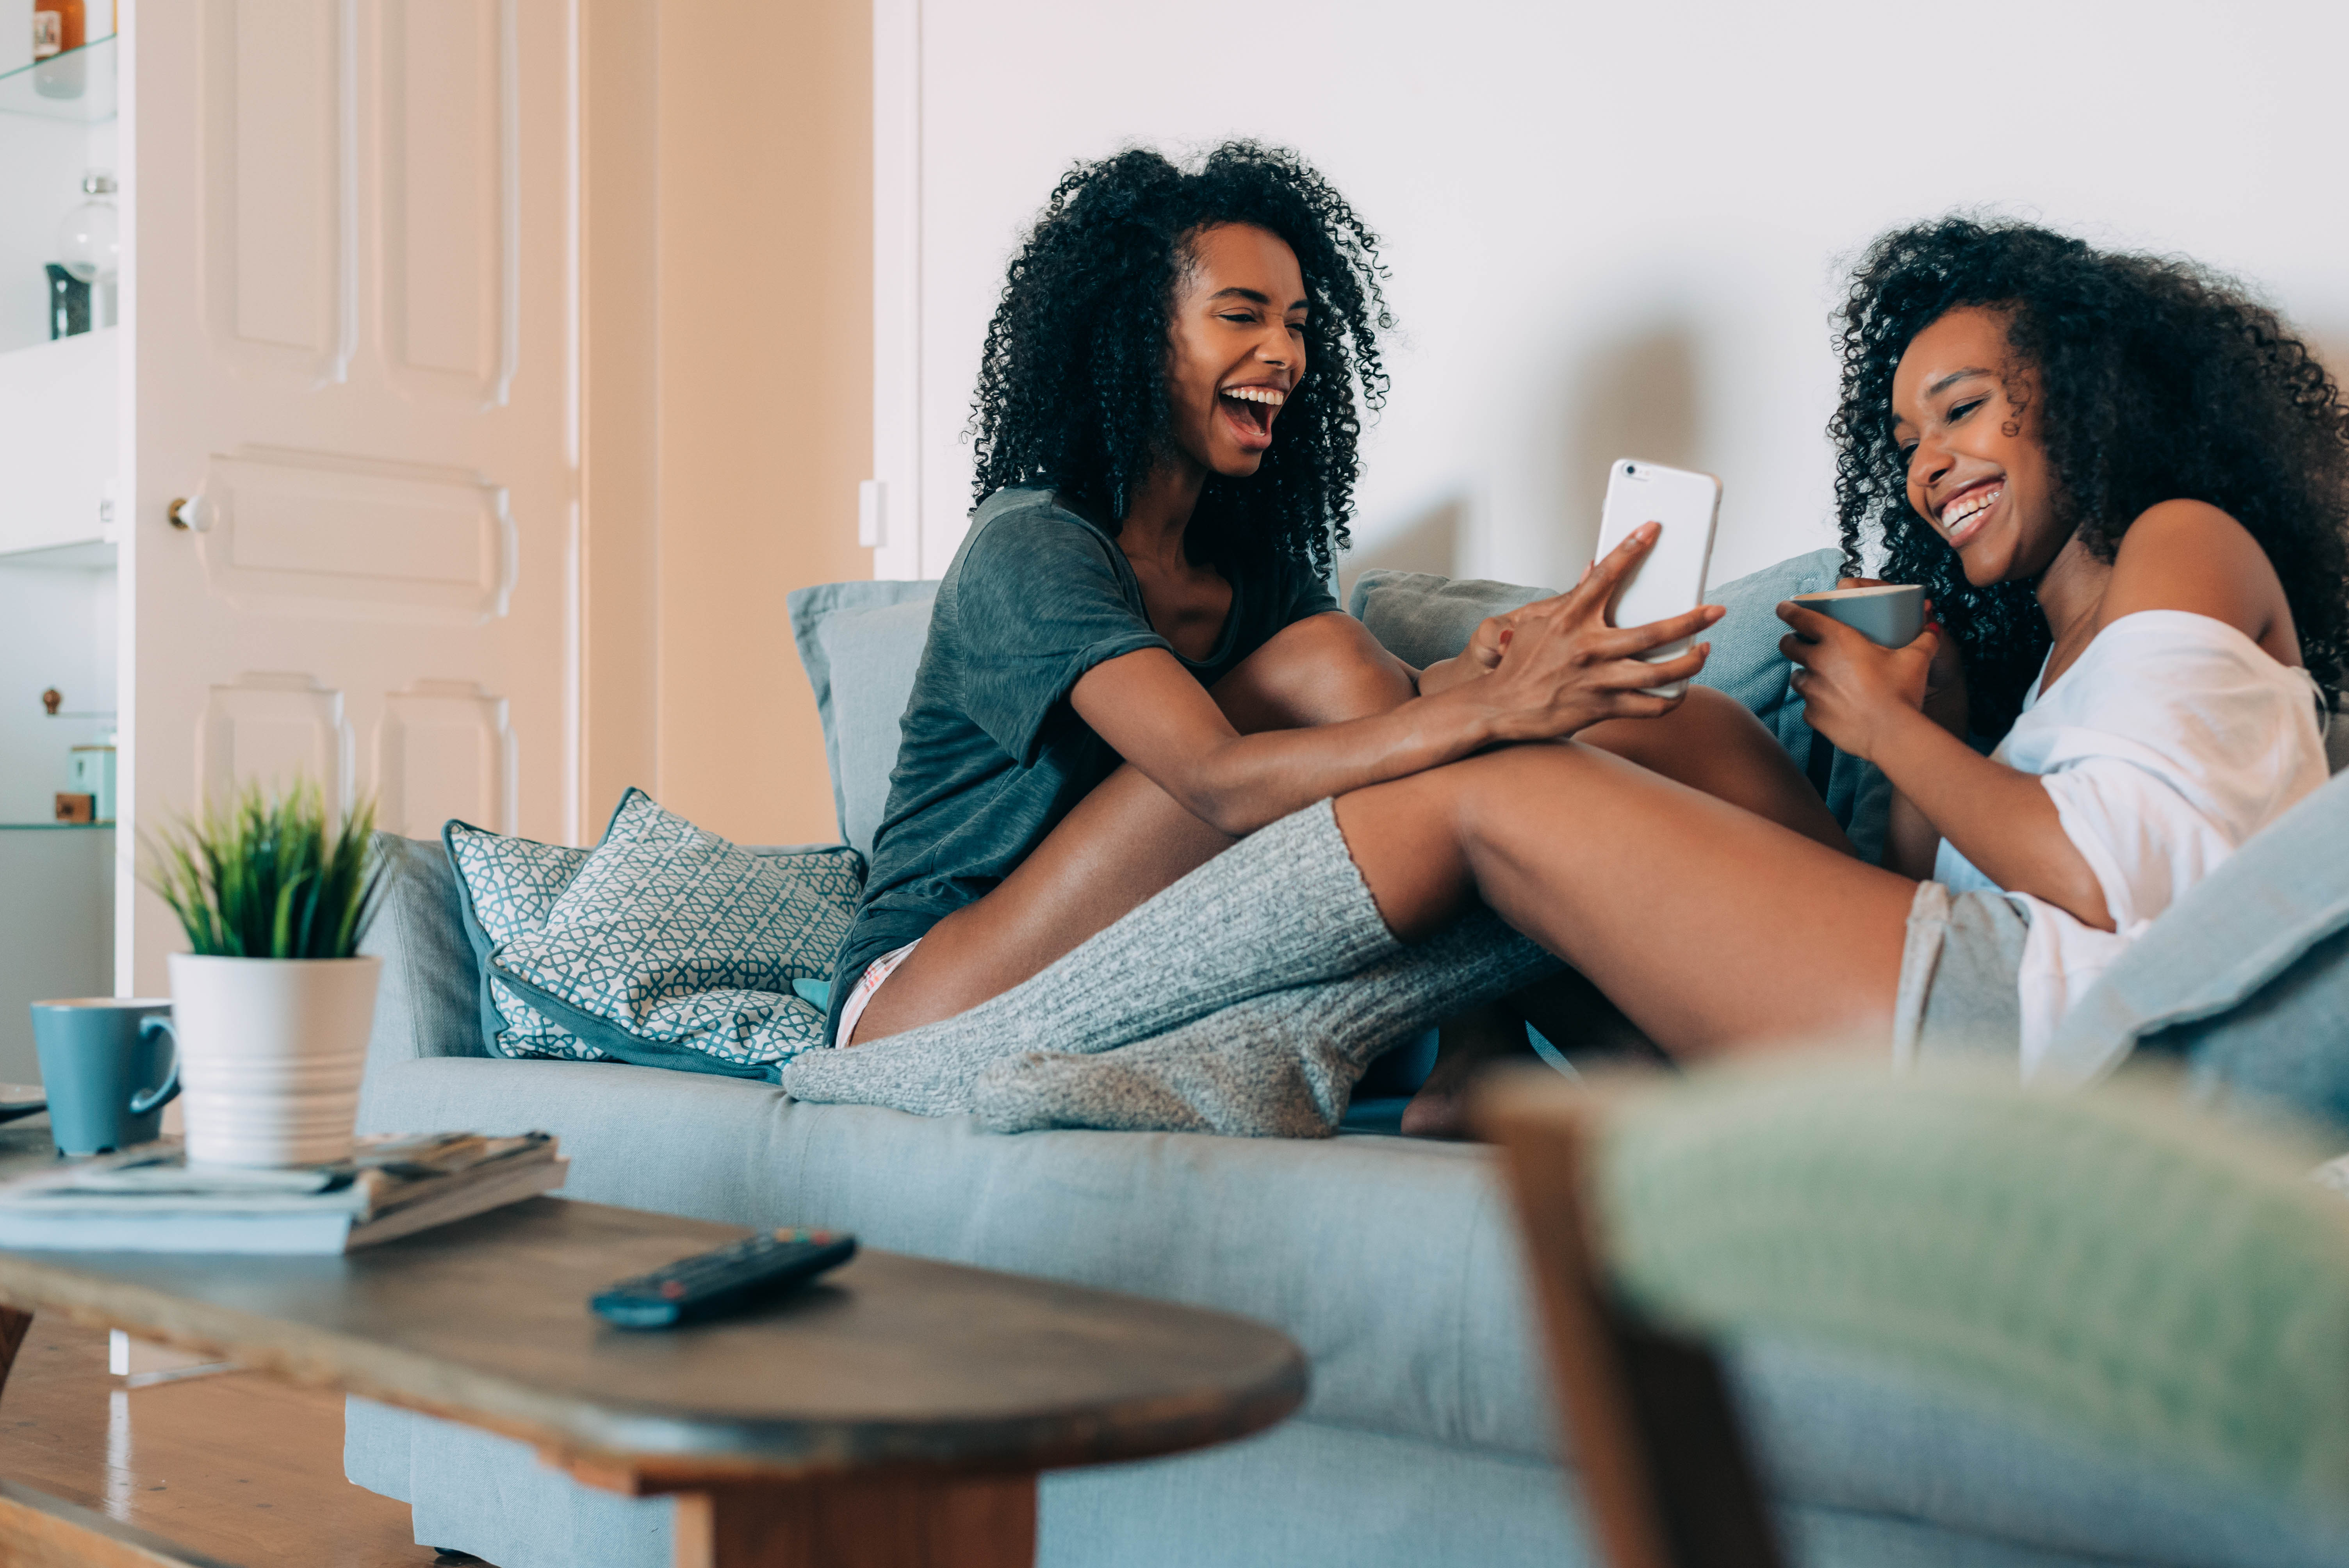 Two young black women sitting on a couch with their phones, laughing and talking